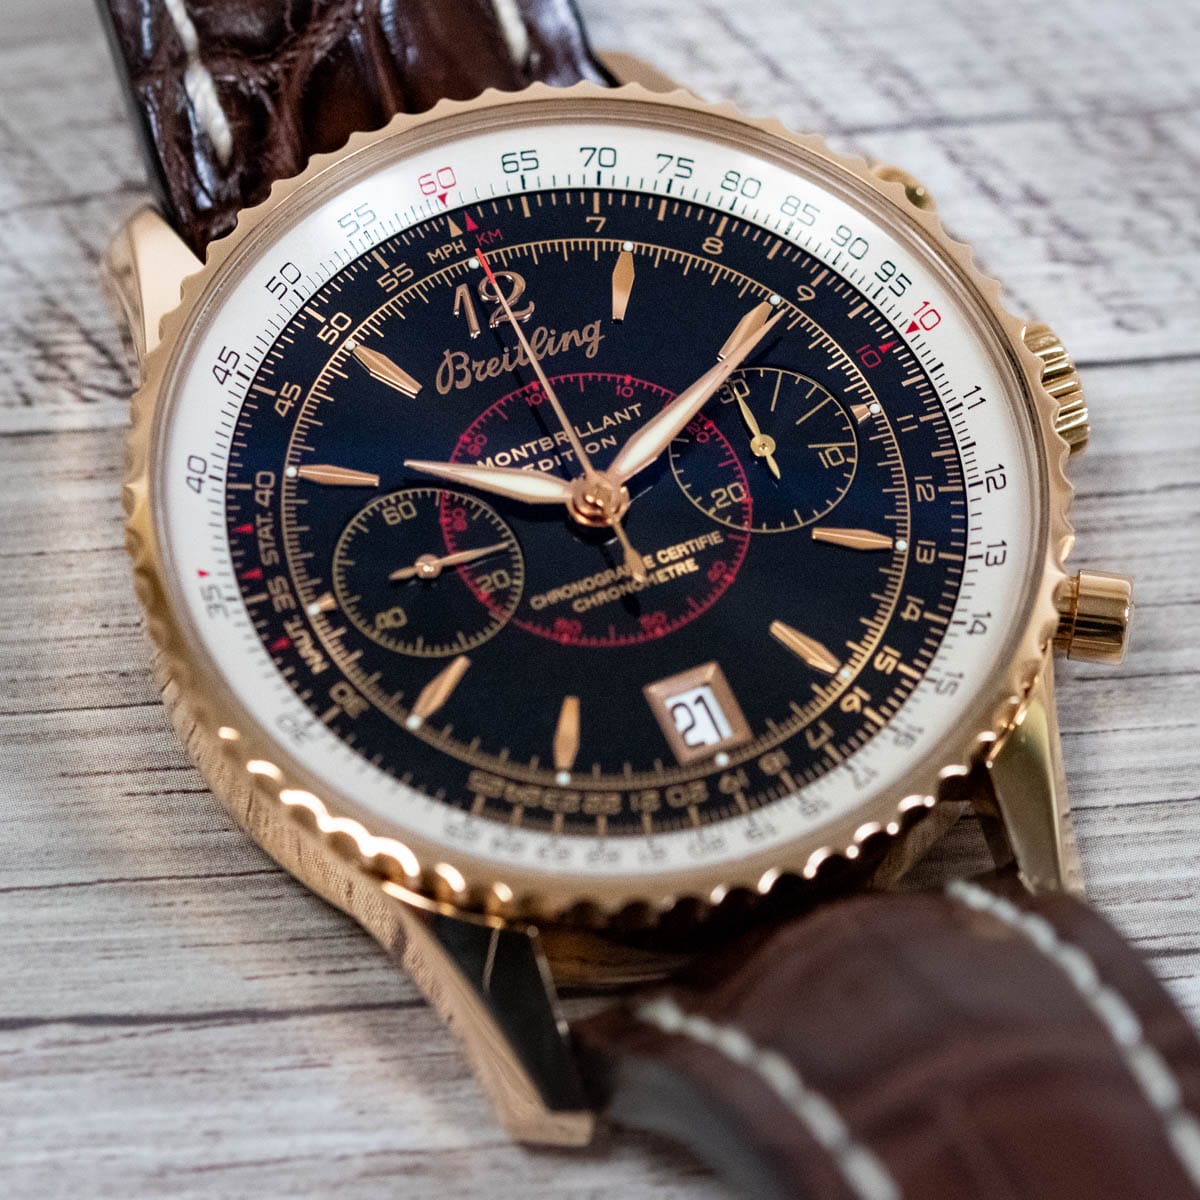 Extra Shot of Navitimer Montbrillant Limited Edition